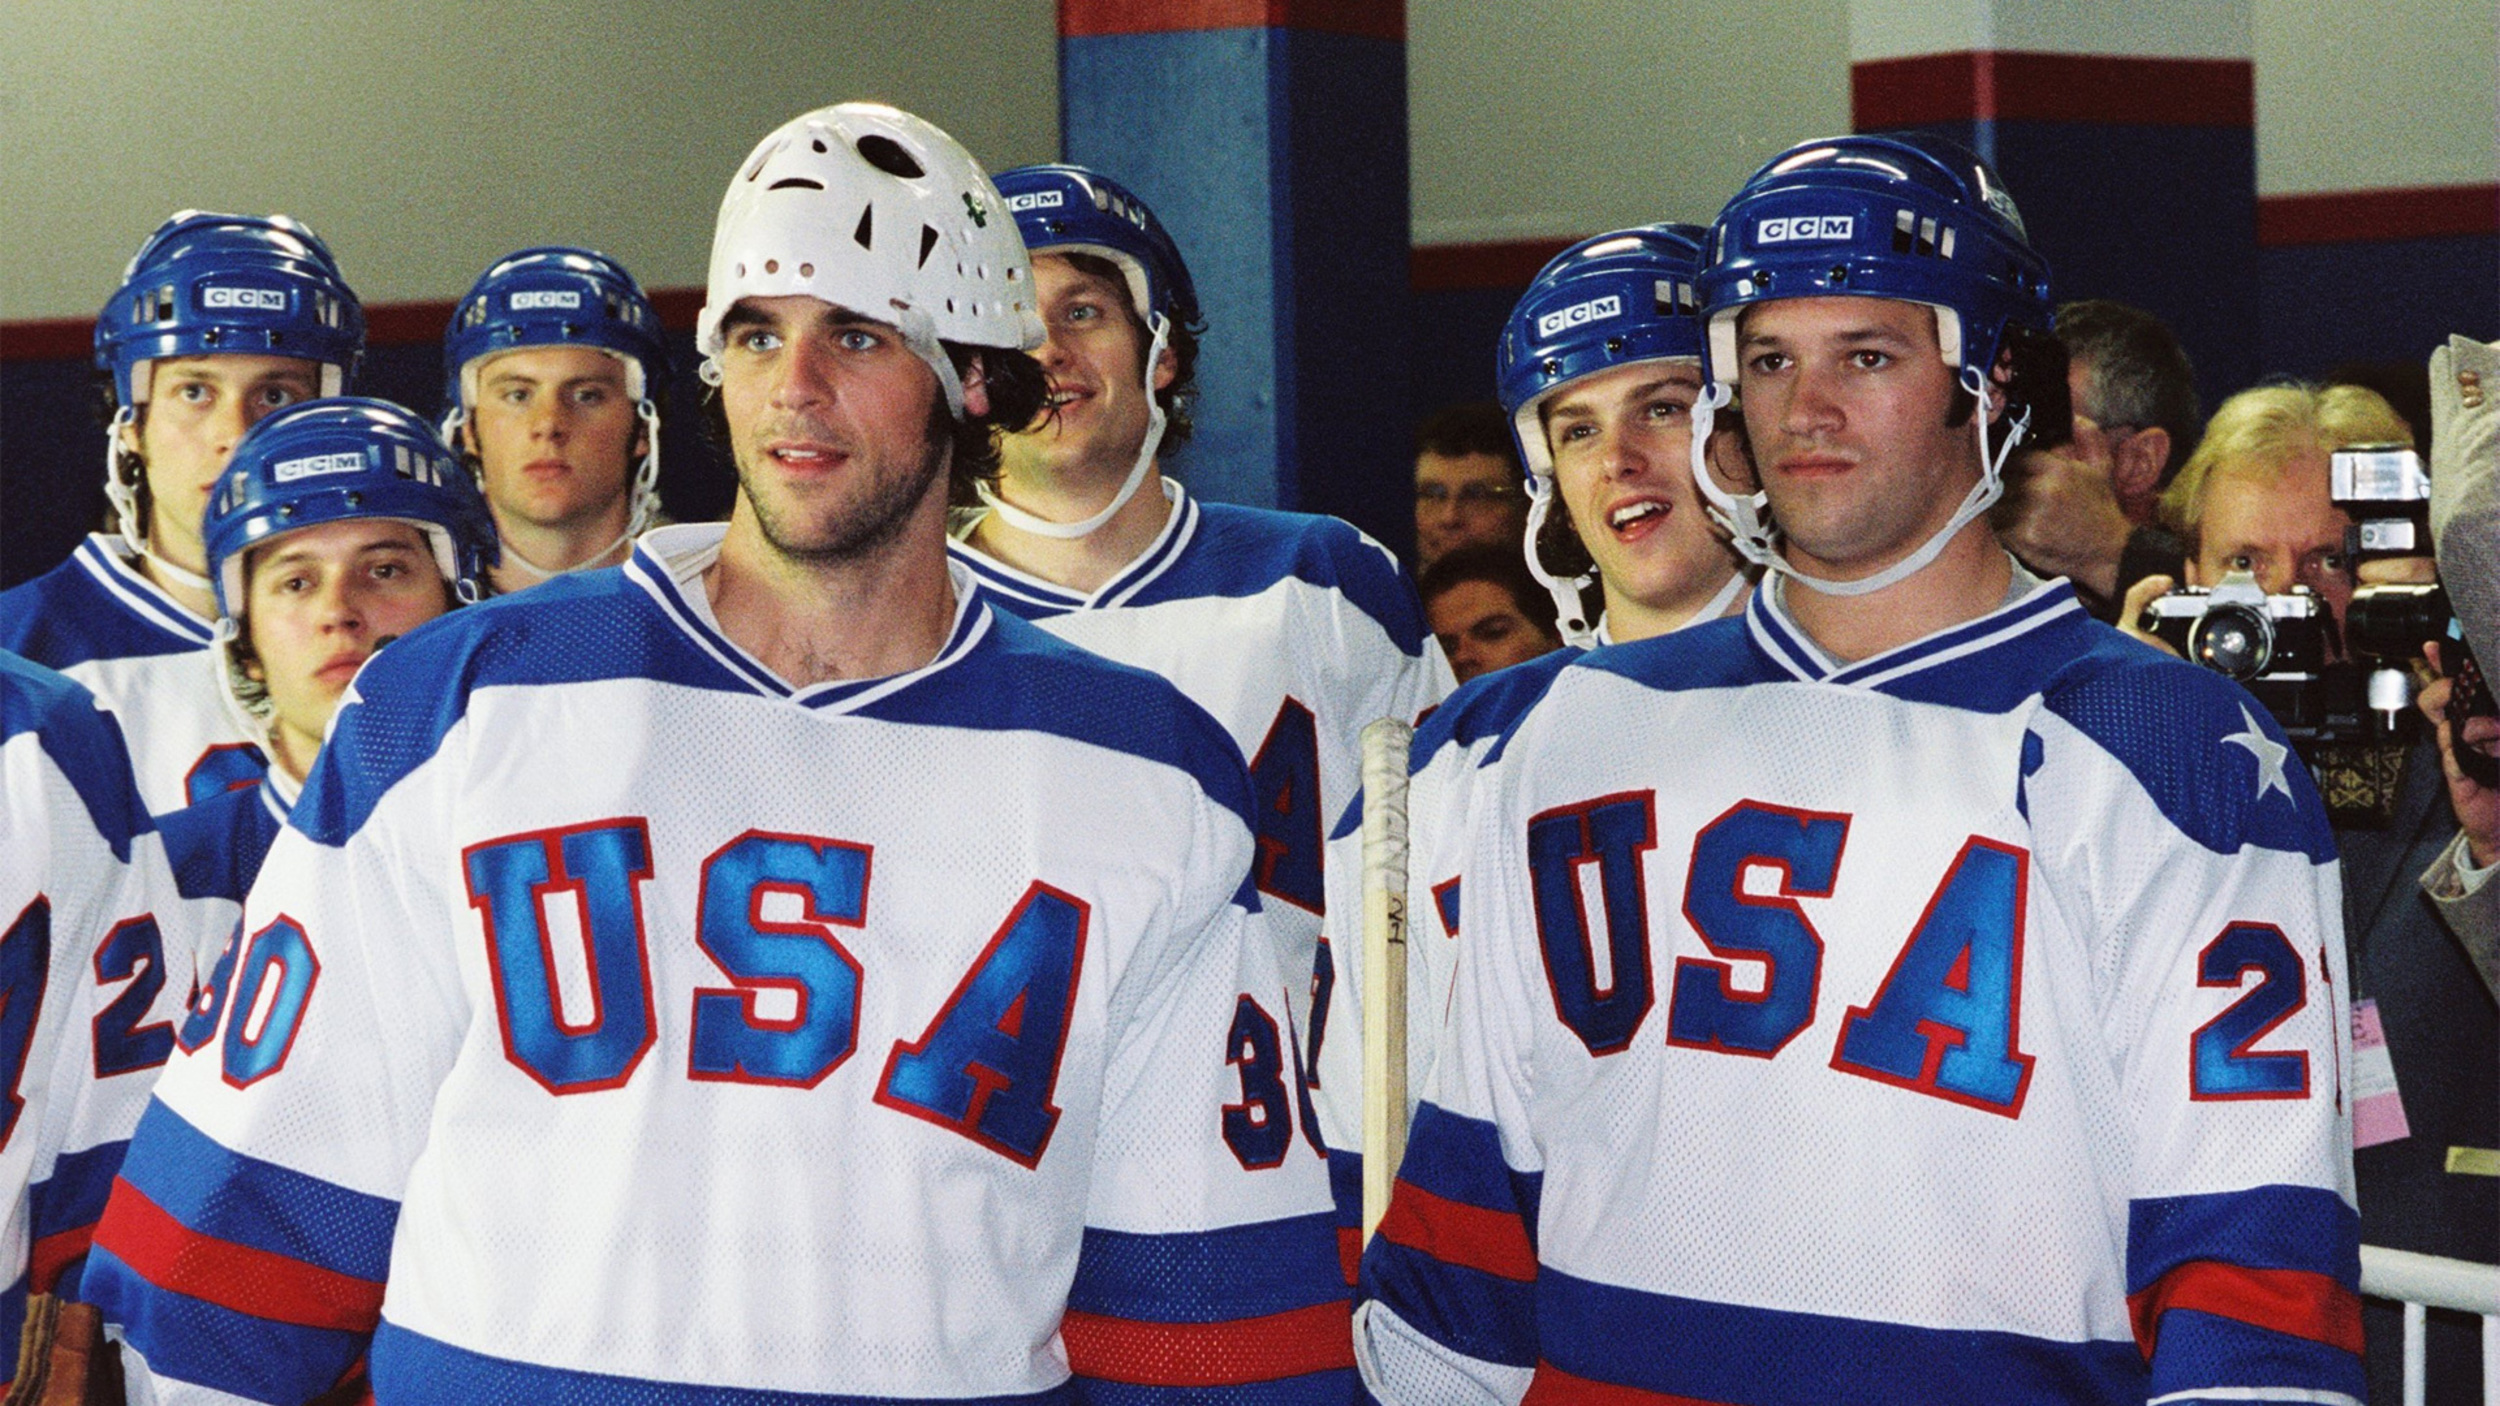 <p>The Miracle on Ice was as captivating as any movie could be. This biopic can’t quite recapture that magic, mostly because we know the United States is going to beat the Soviet Union. Nevertheless, Kurt Russell is strong as coach Herb Brooks, and there is some real impressive action scenes in this one.</p><p>You may also like: <a href='https://www.yardbarker.com/mlb/articles/20_mlb_players_that_could_retire_after_the_2024_season_032924/s1__40097868'>20 MLB players that could retire after the 2024 season</a></p>